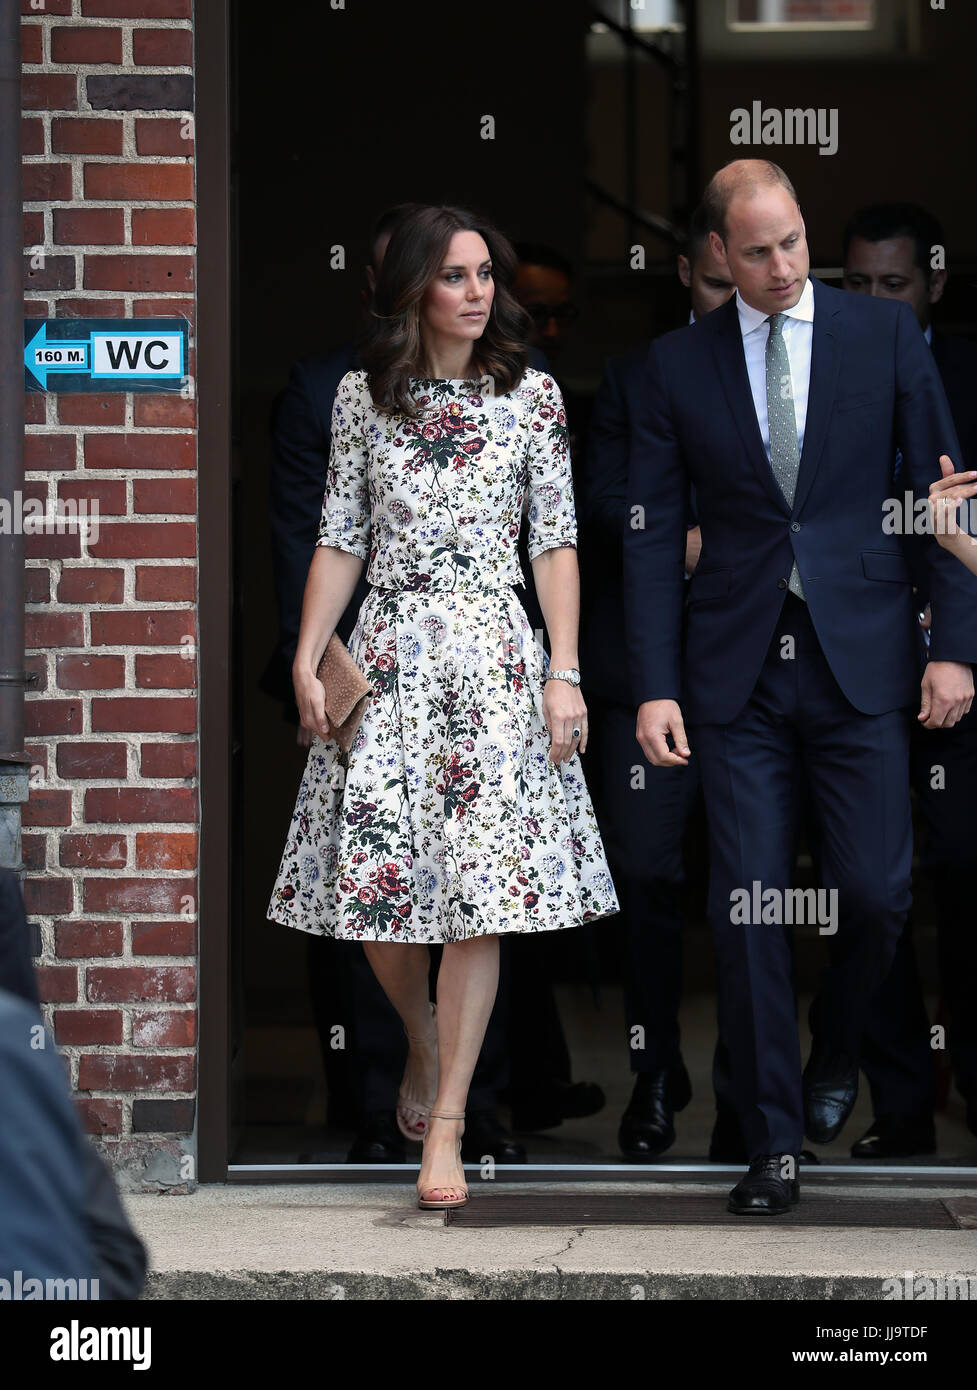 The Duke and Duchess of Cambridge during a visit the former Nazi Germany Concentration Camp, Stutthof, on the second day of their five-day tour of Poland and Germany. Stock Photo